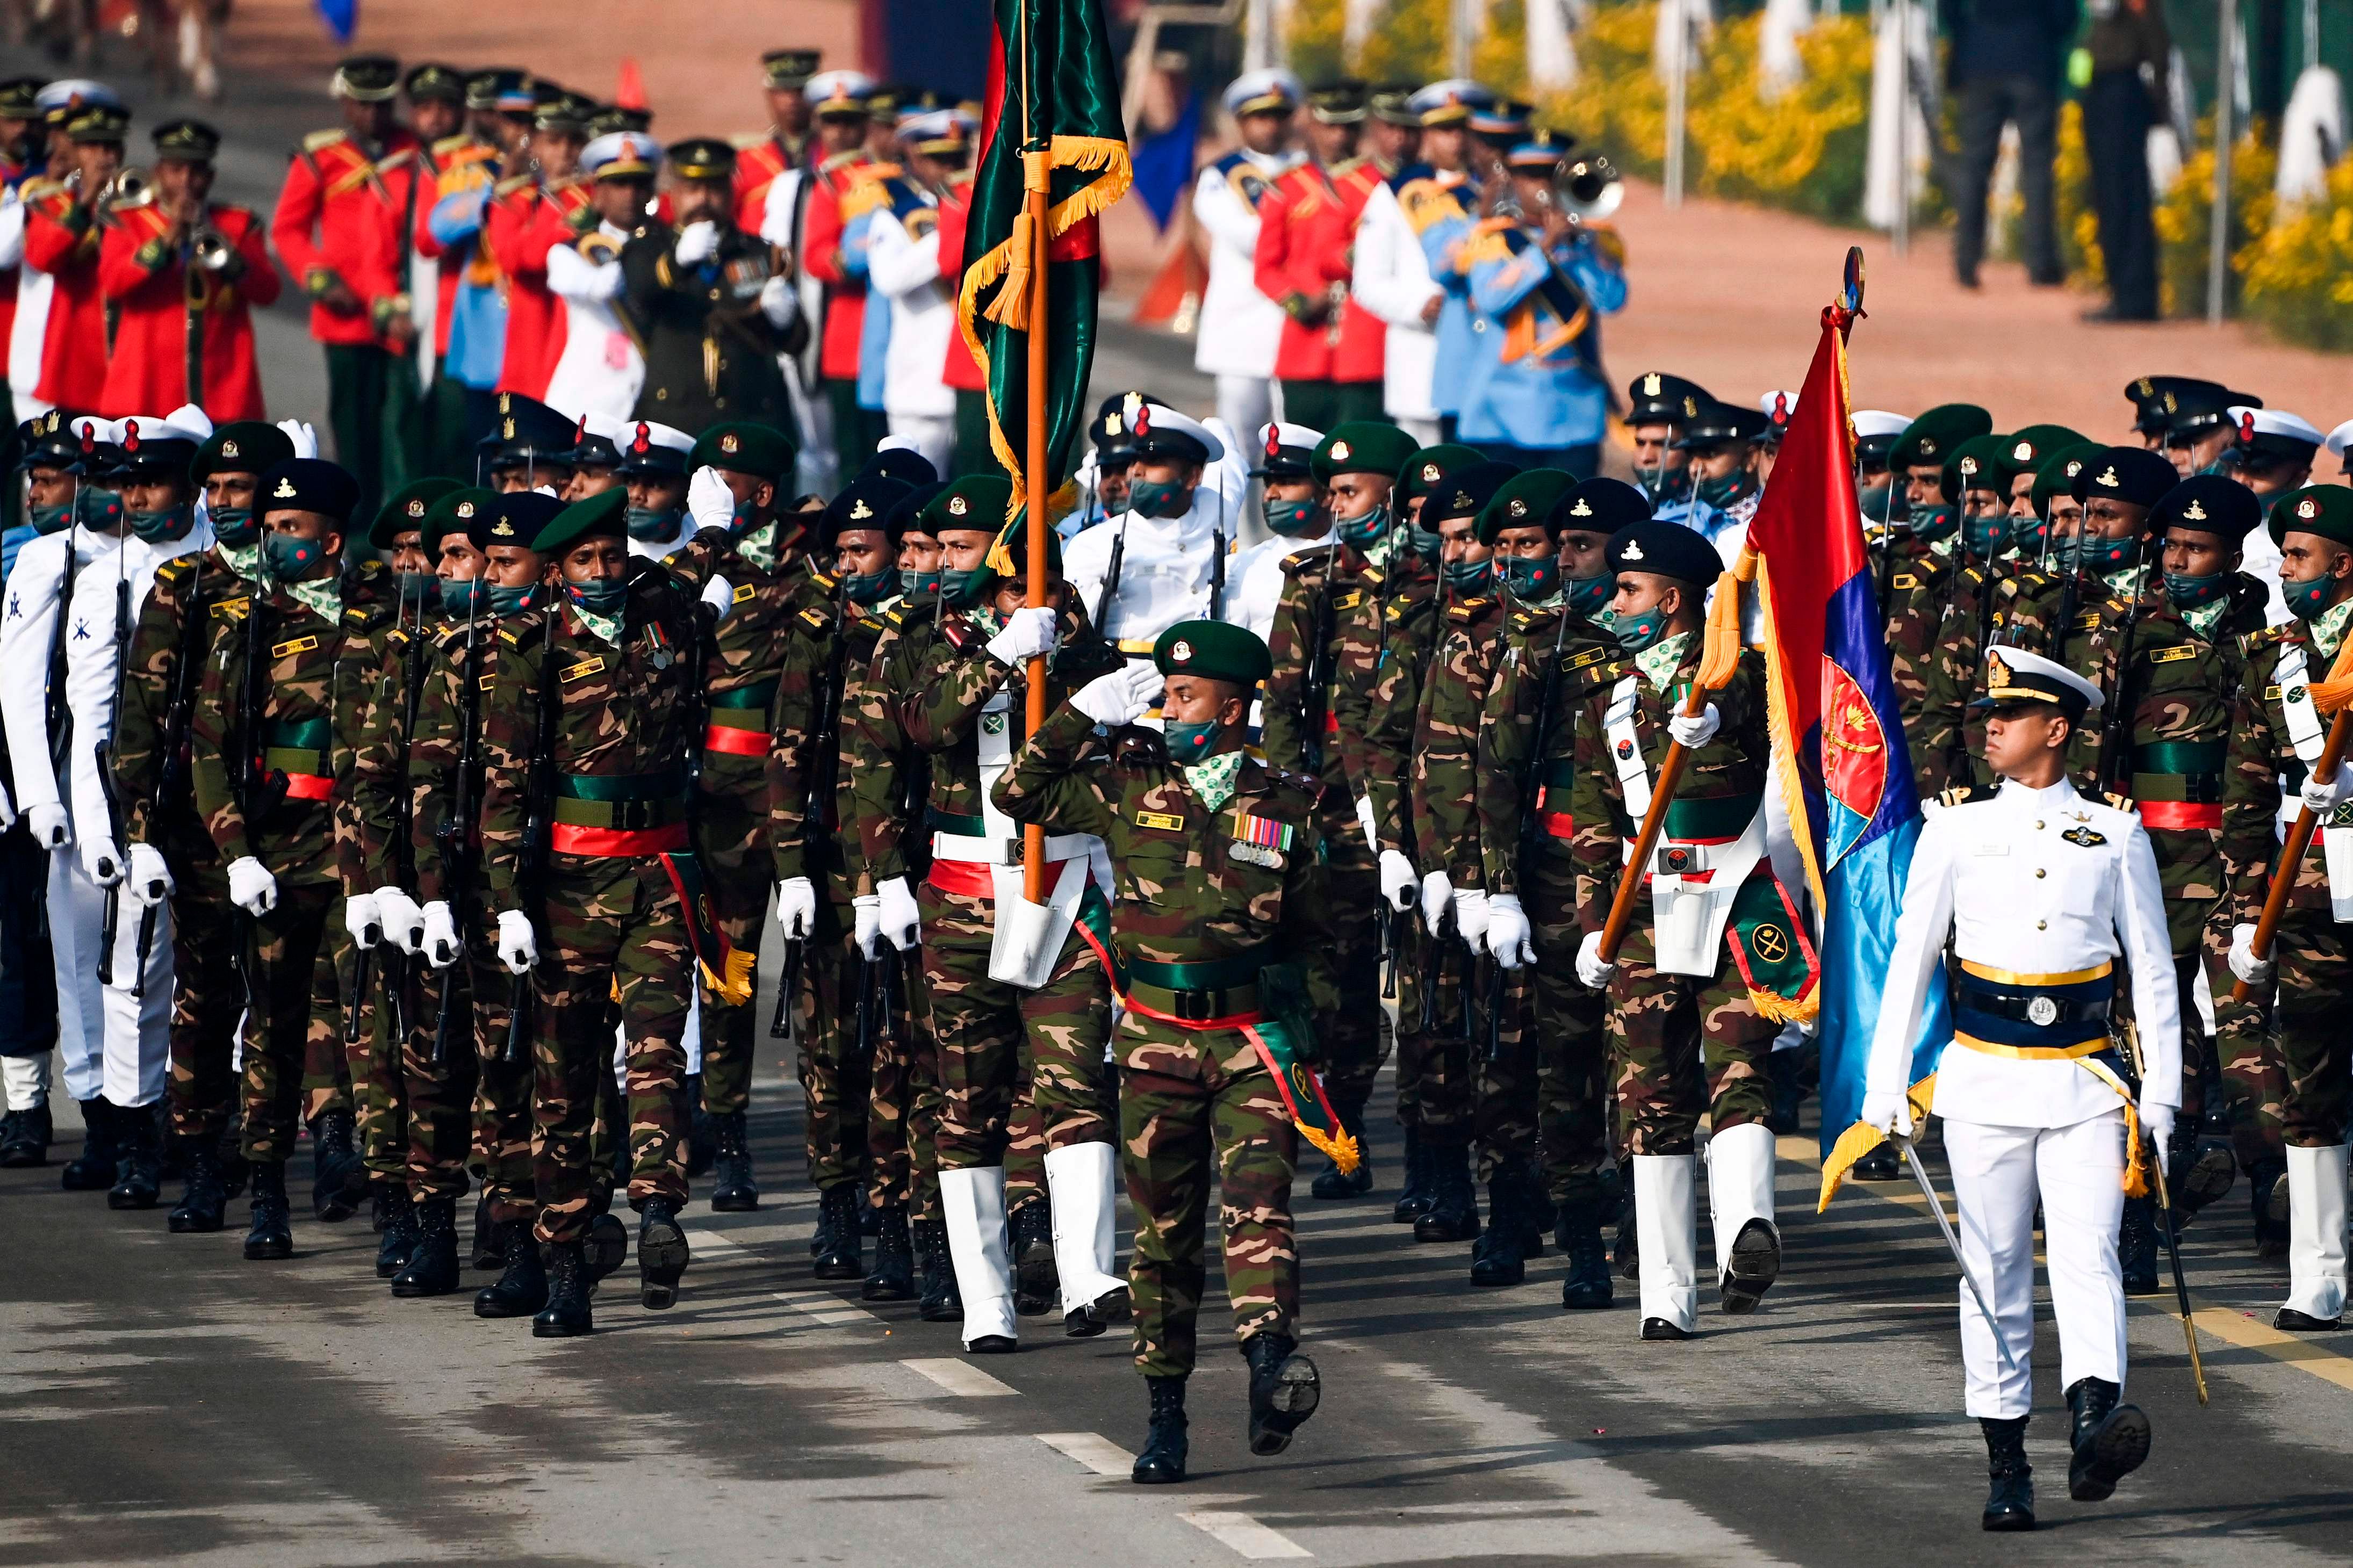 Bangladesh's soldiers march along Rajpath during India's Republic Day parade in New Delhi on January 26, 2021. Credit: AFP Photo